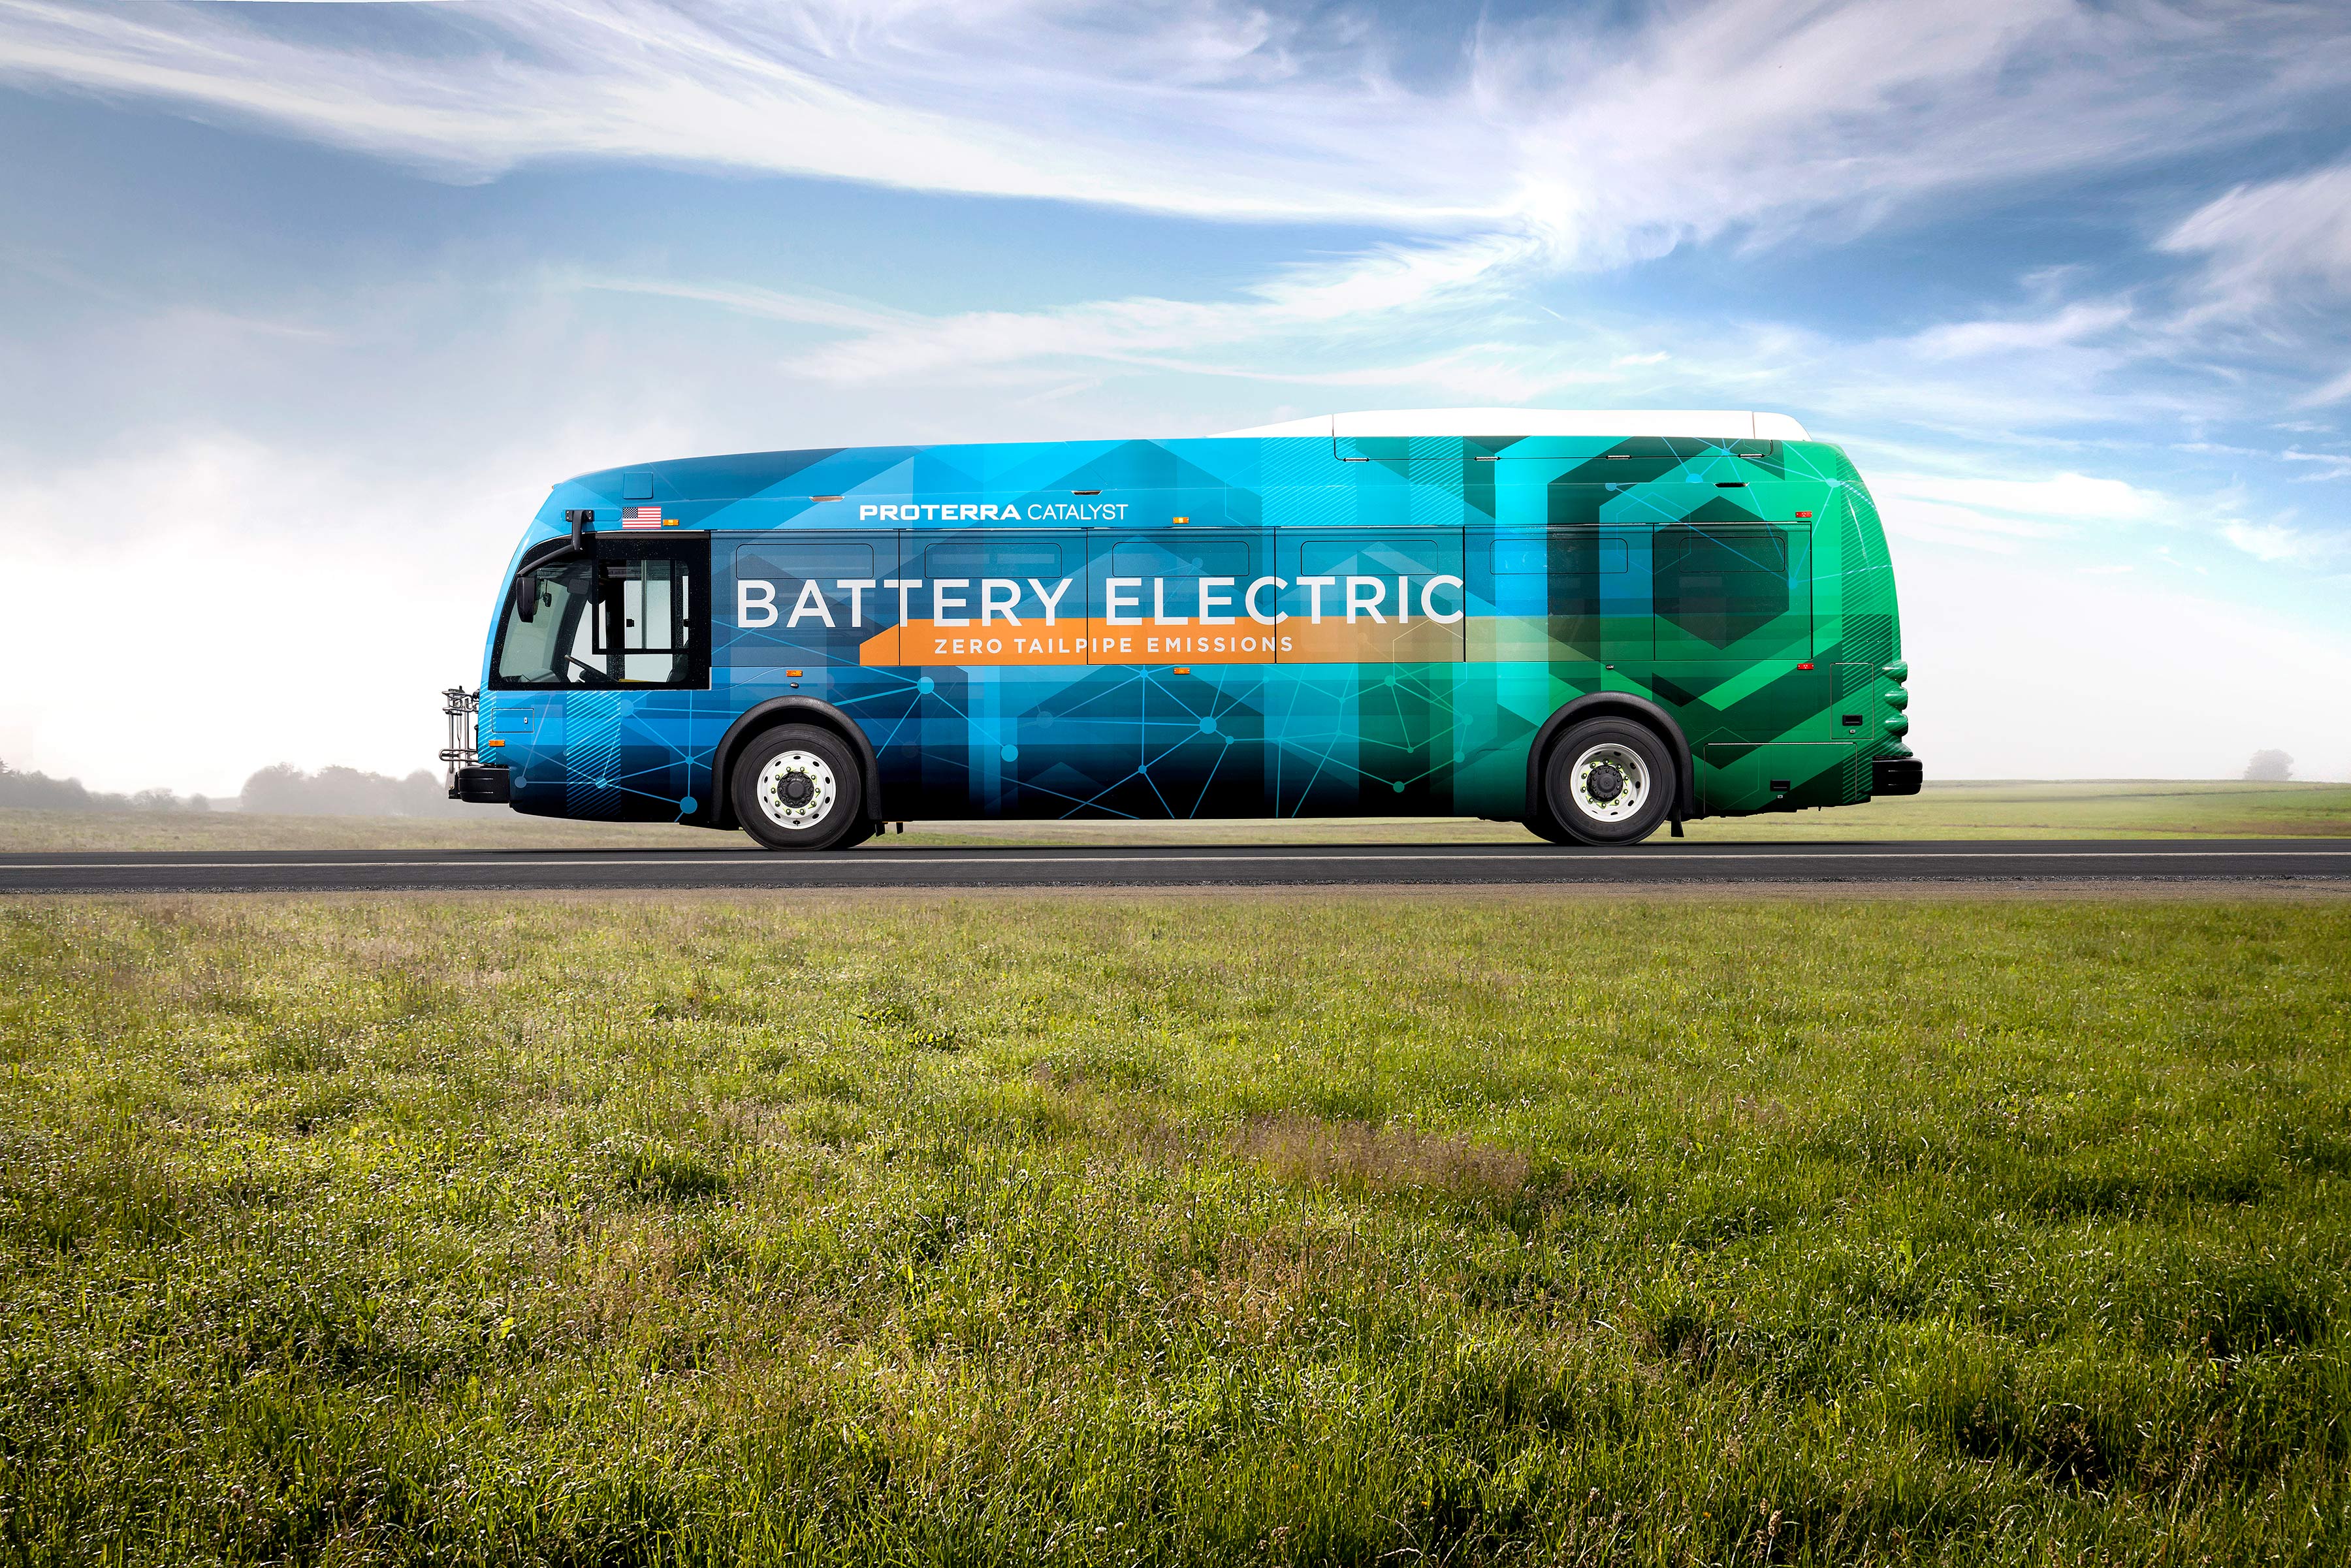 Proterra, the Tesla of electric buses, closes in on $1 billion valuation